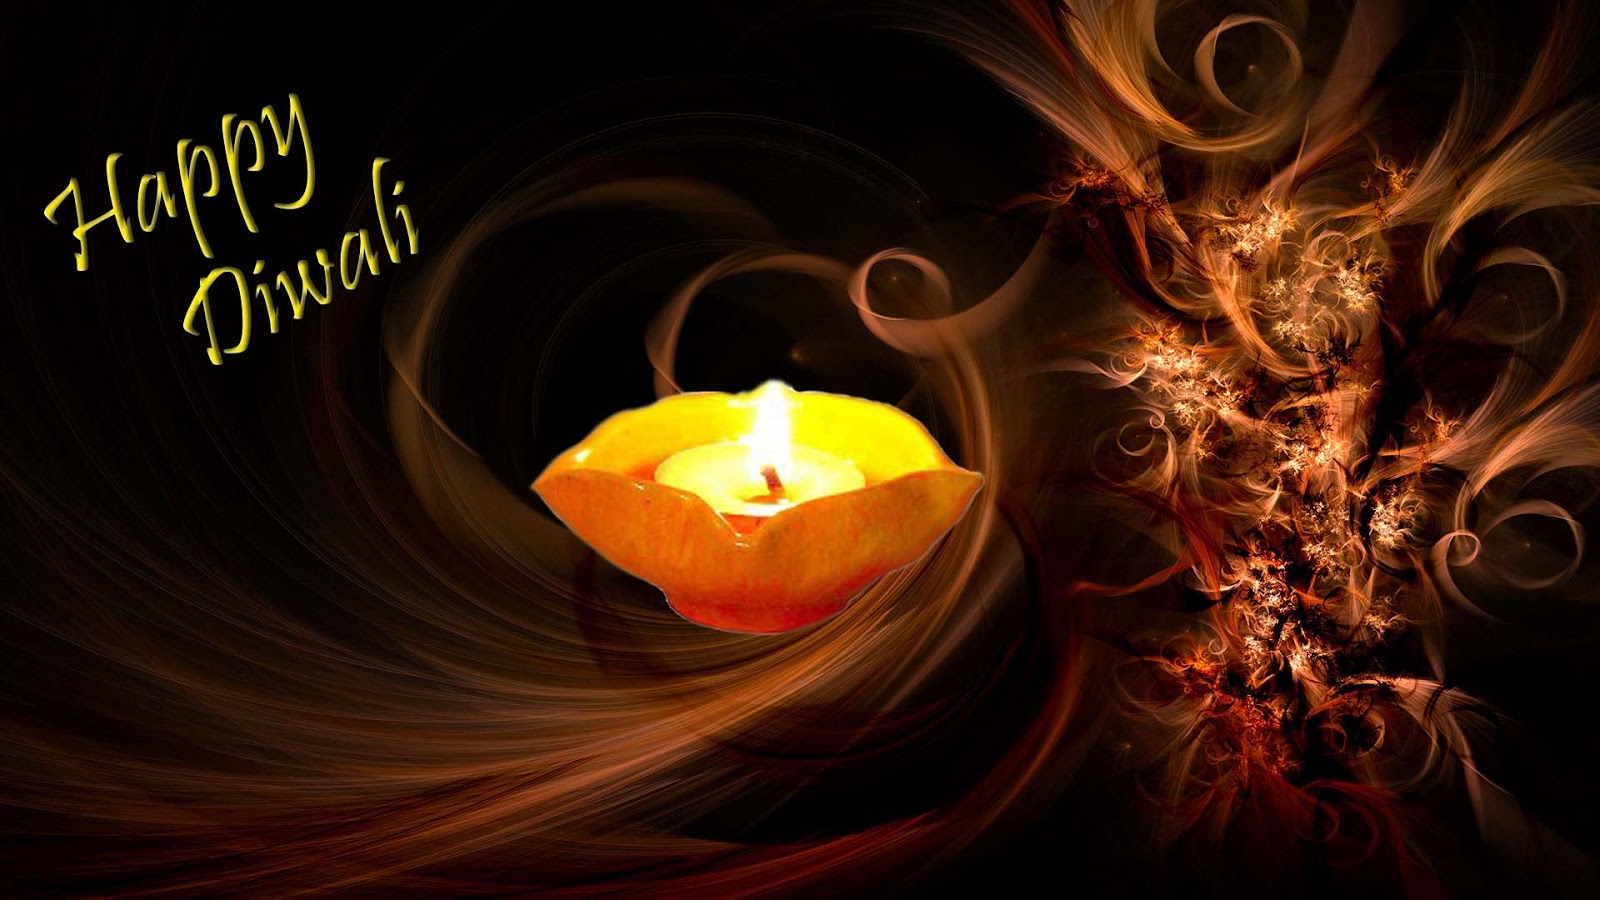 Diwali Holiday Deepak Wali Wishes Wall Papers Images - Happy Dhanteras In  Black Background - 1600x900 Wallpaper 